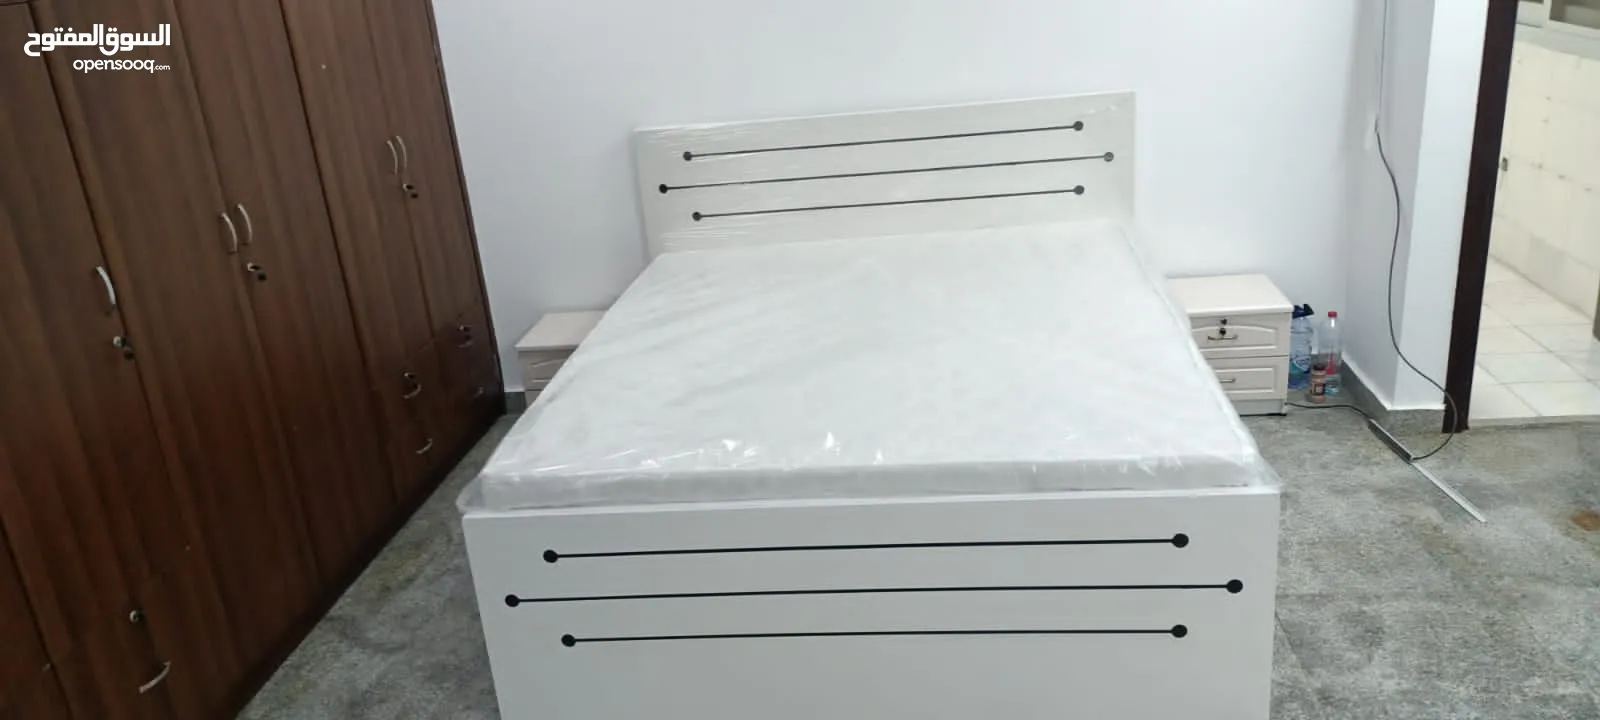 brand new single bed with mattress Available